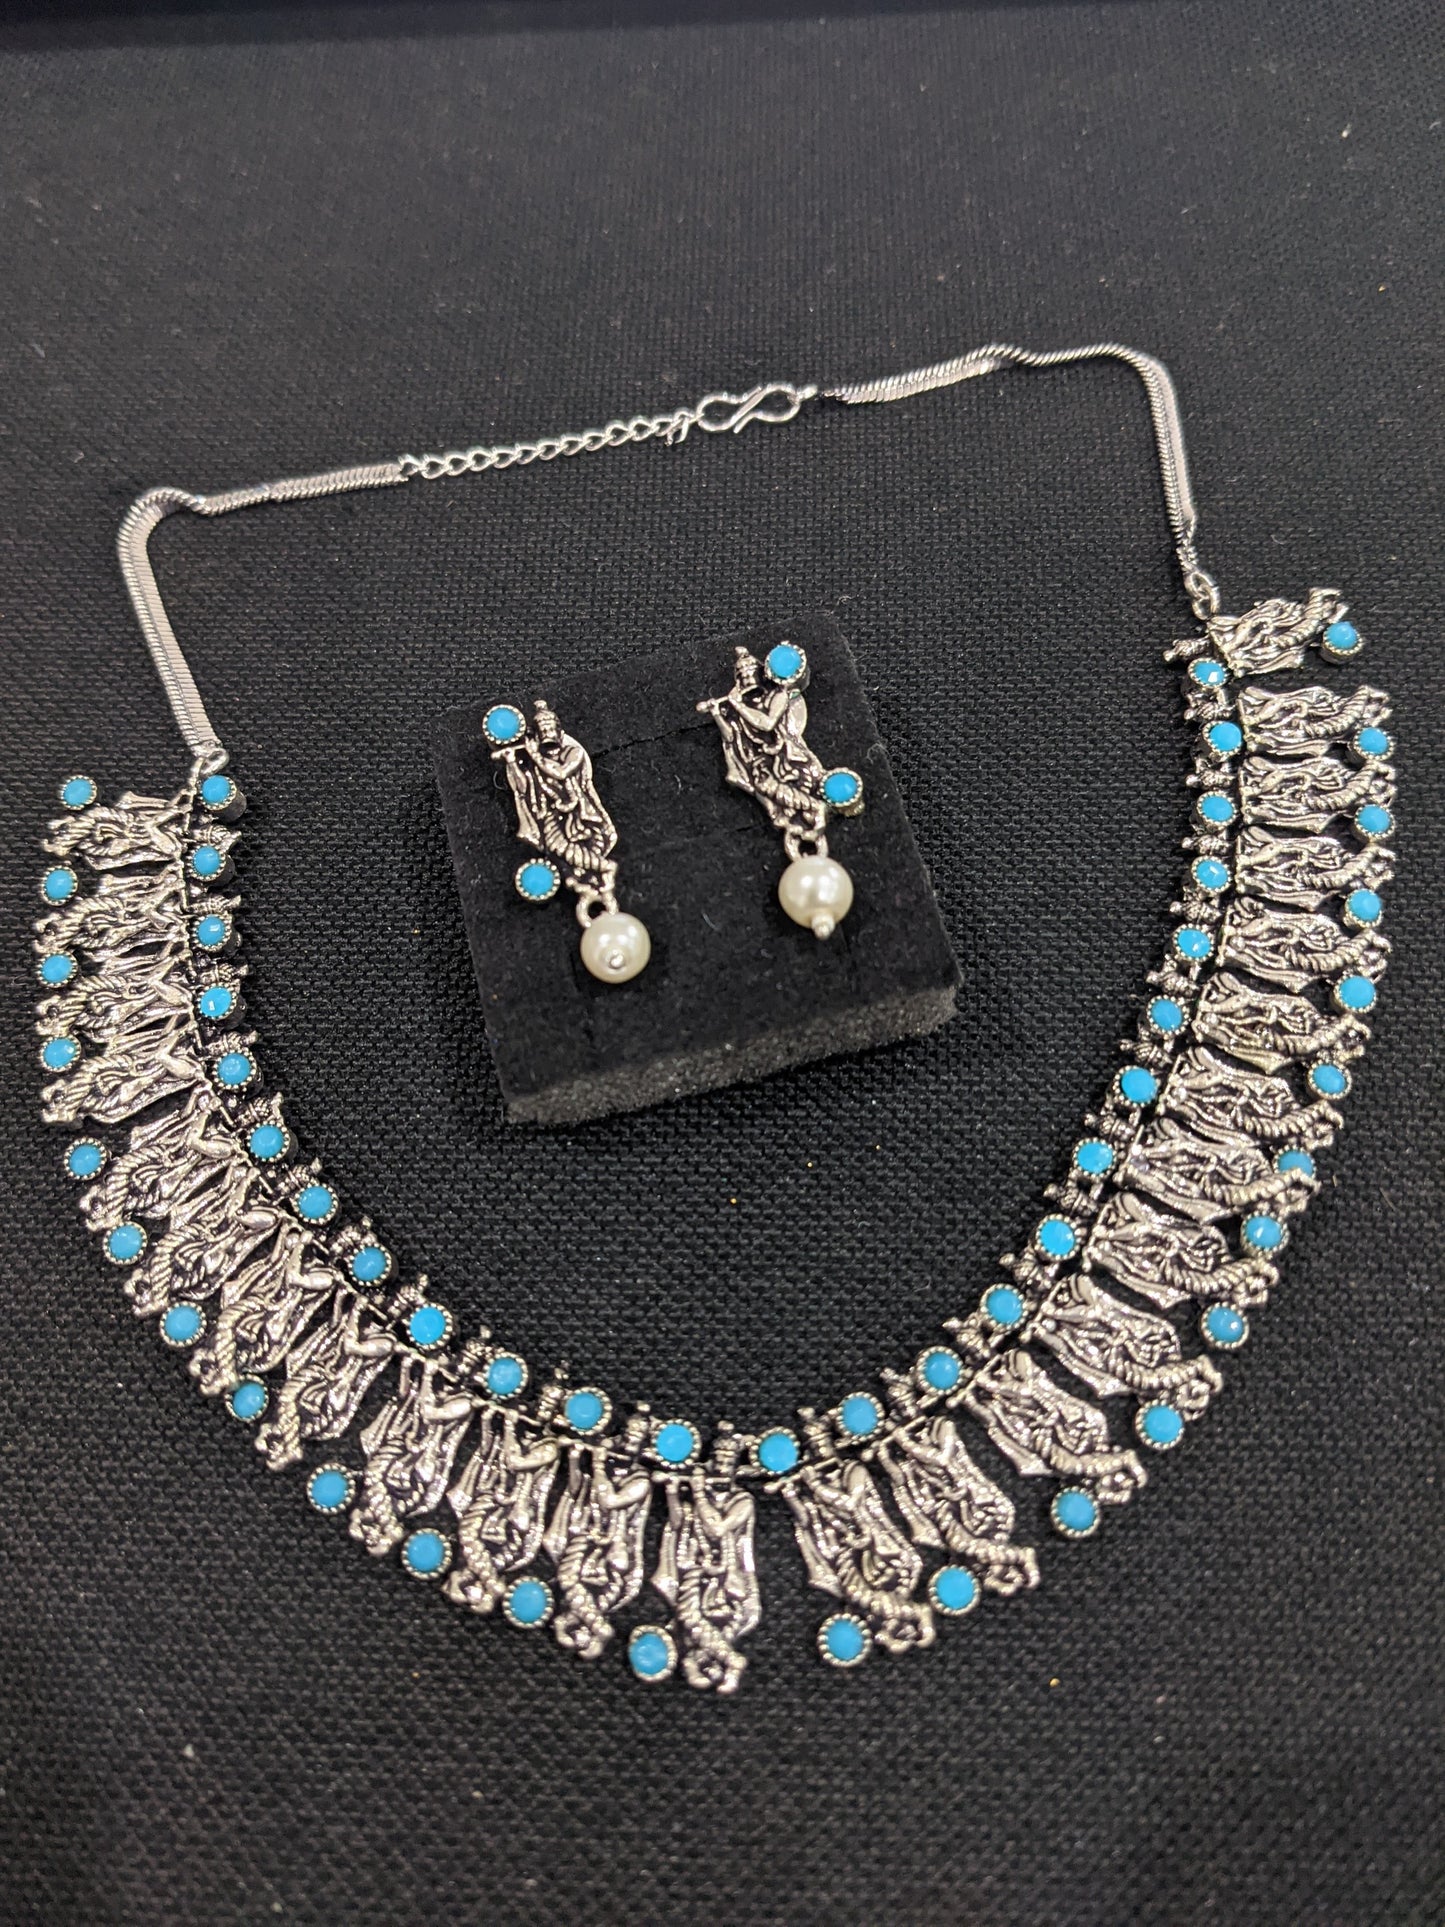 Oxidized Silver Lord Krishna Charm Choker Necklace and Earring set